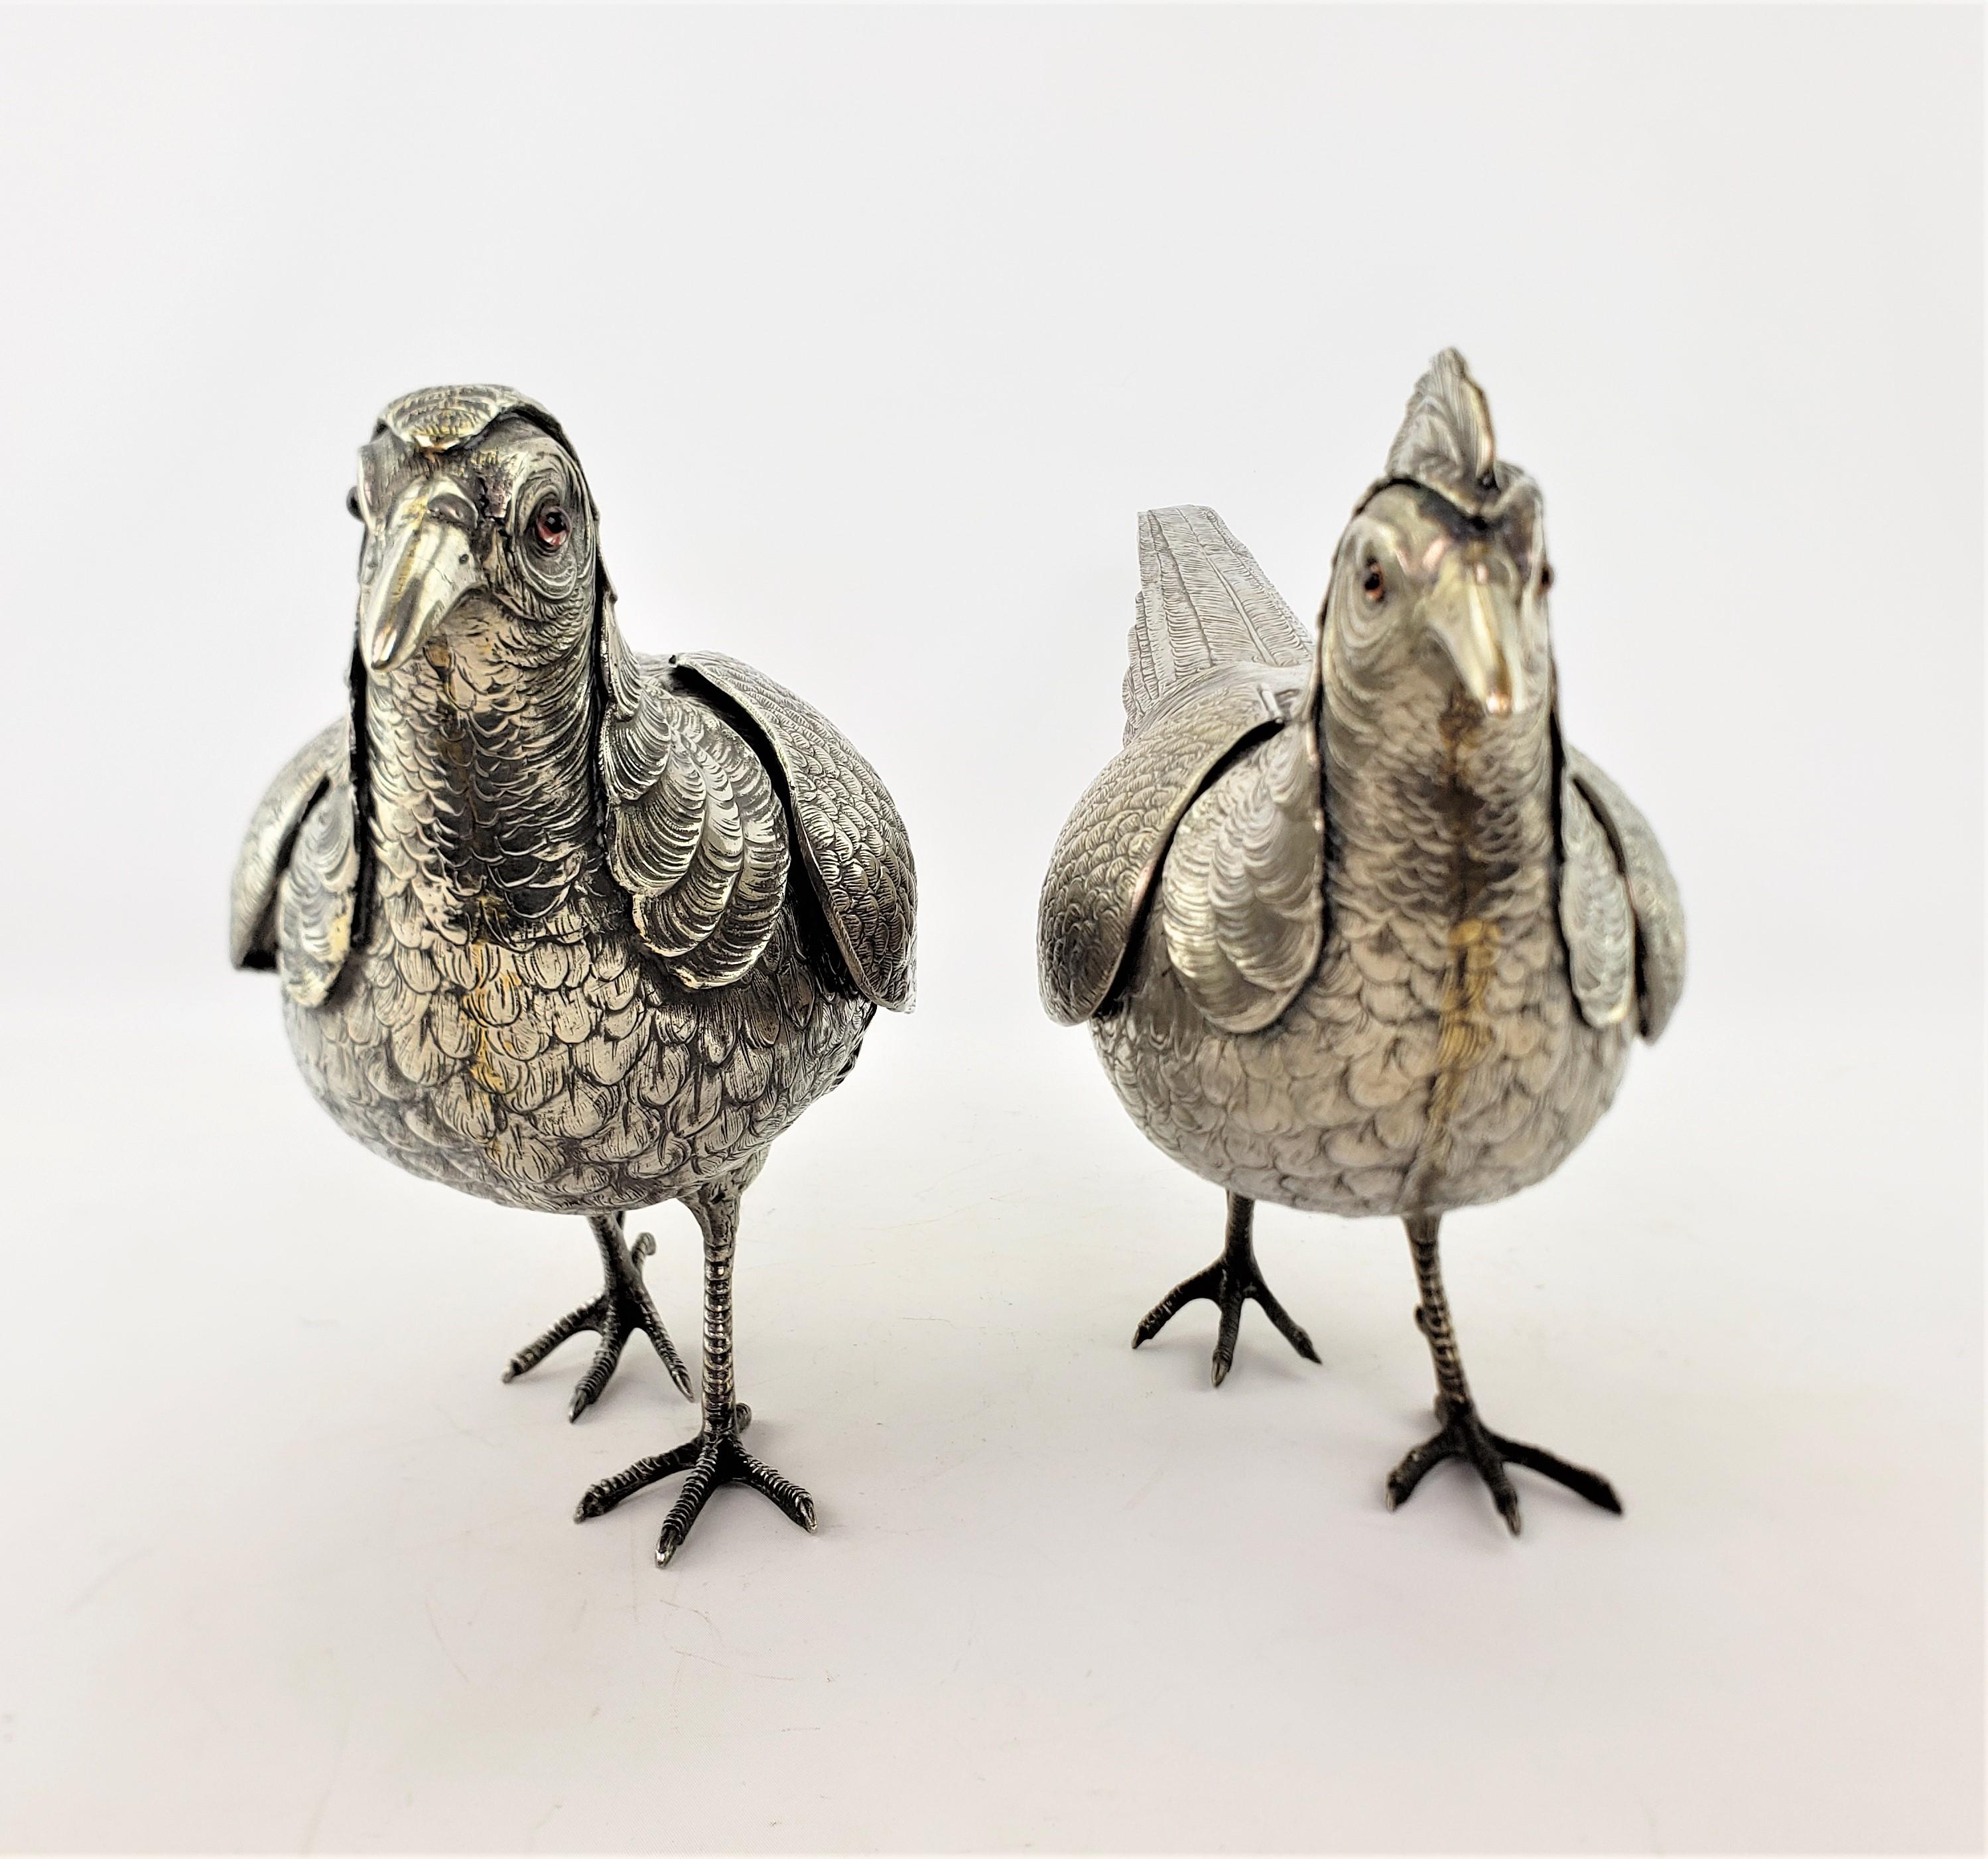 Pair of Large Antique Silver Plated Pheasant Sculptures with Articulated Wings In Good Condition For Sale In Hamilton, Ontario